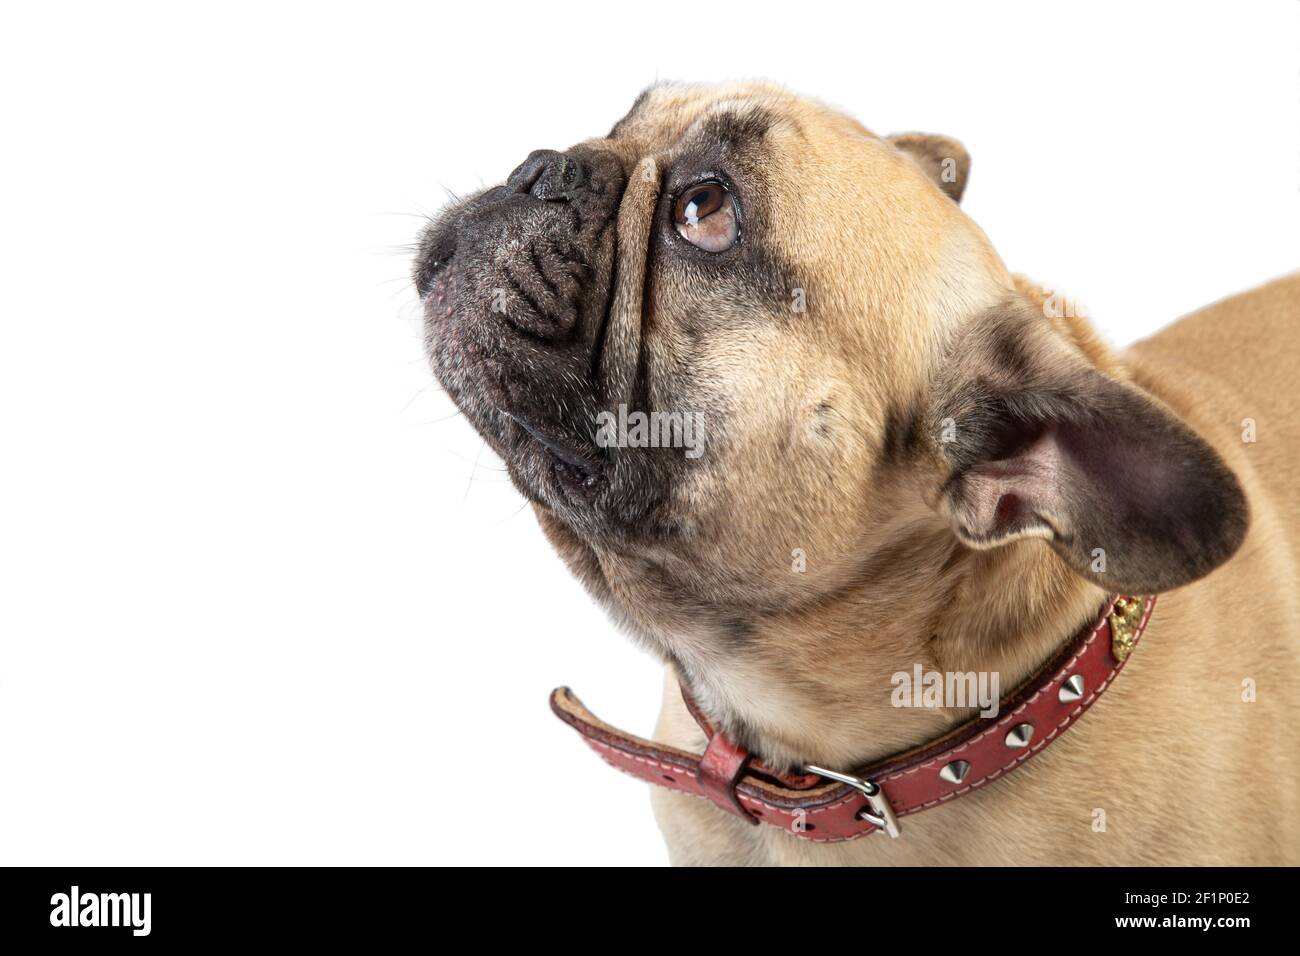 French bull dog looking up on a white background Stock Photo